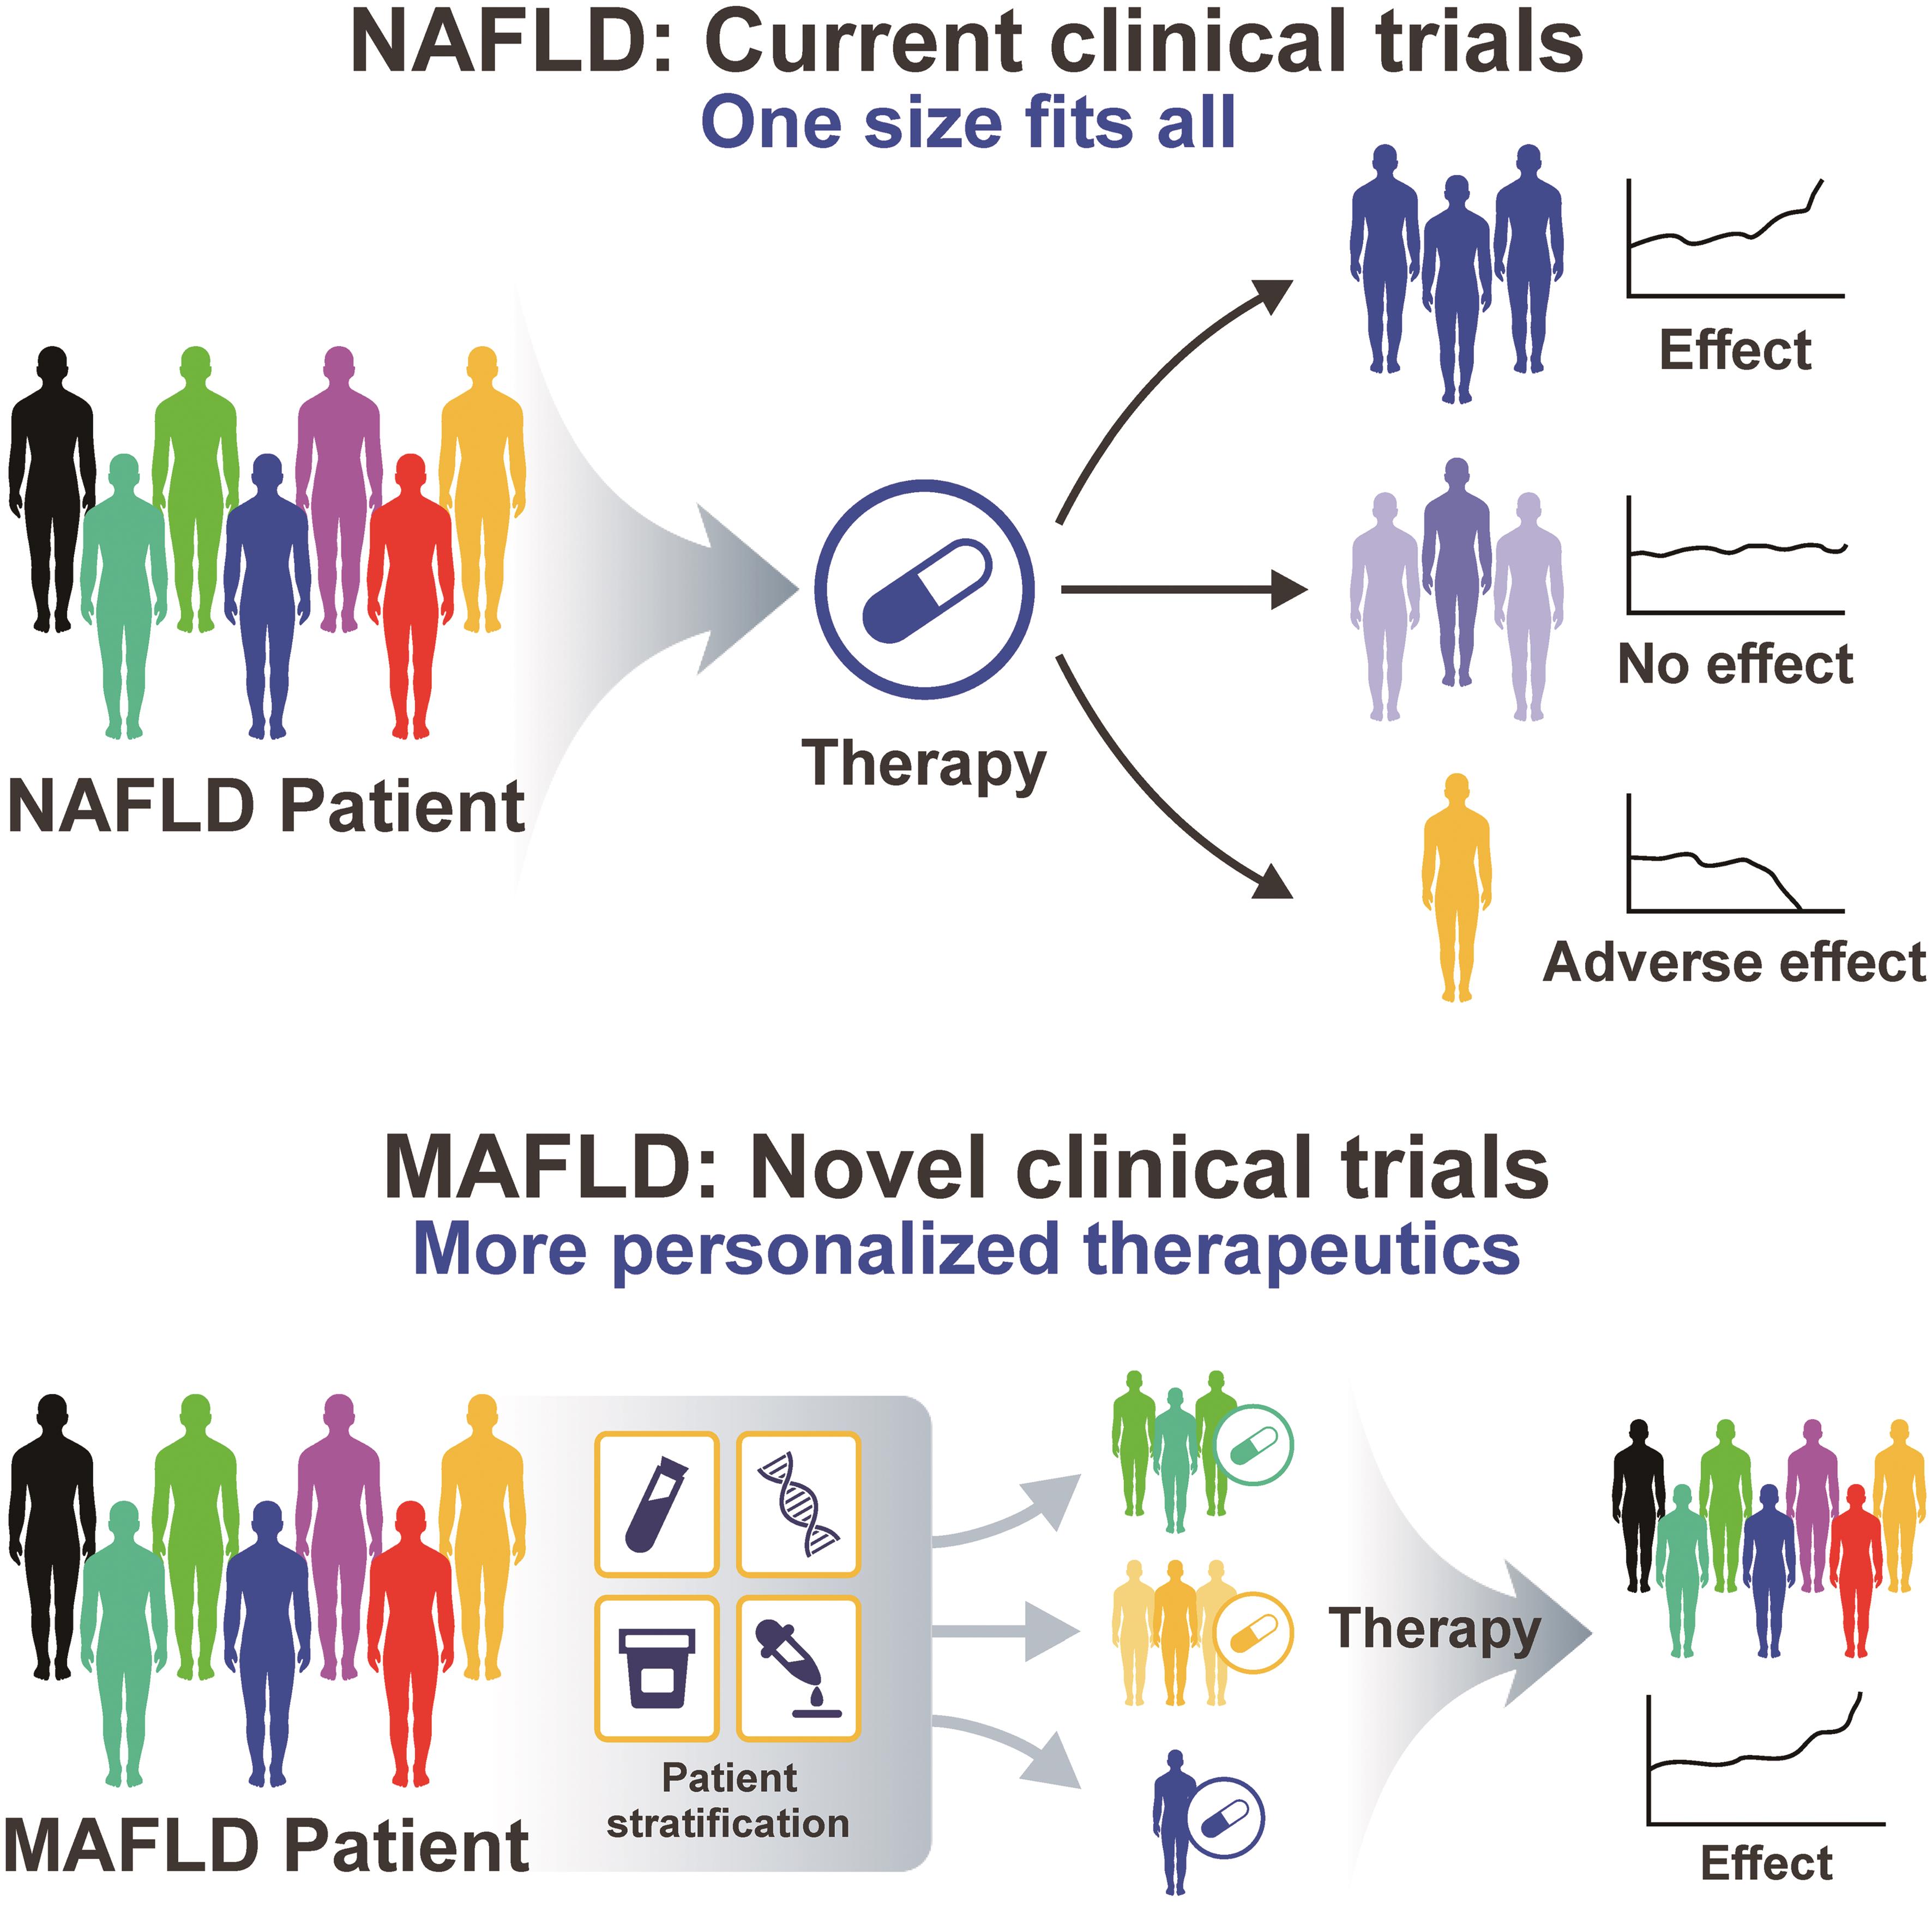 One-size-fits-all approach of clinical trials in the era of <italic>NAFLD</italic> and proposed personalized trials in the era of MAFLD.